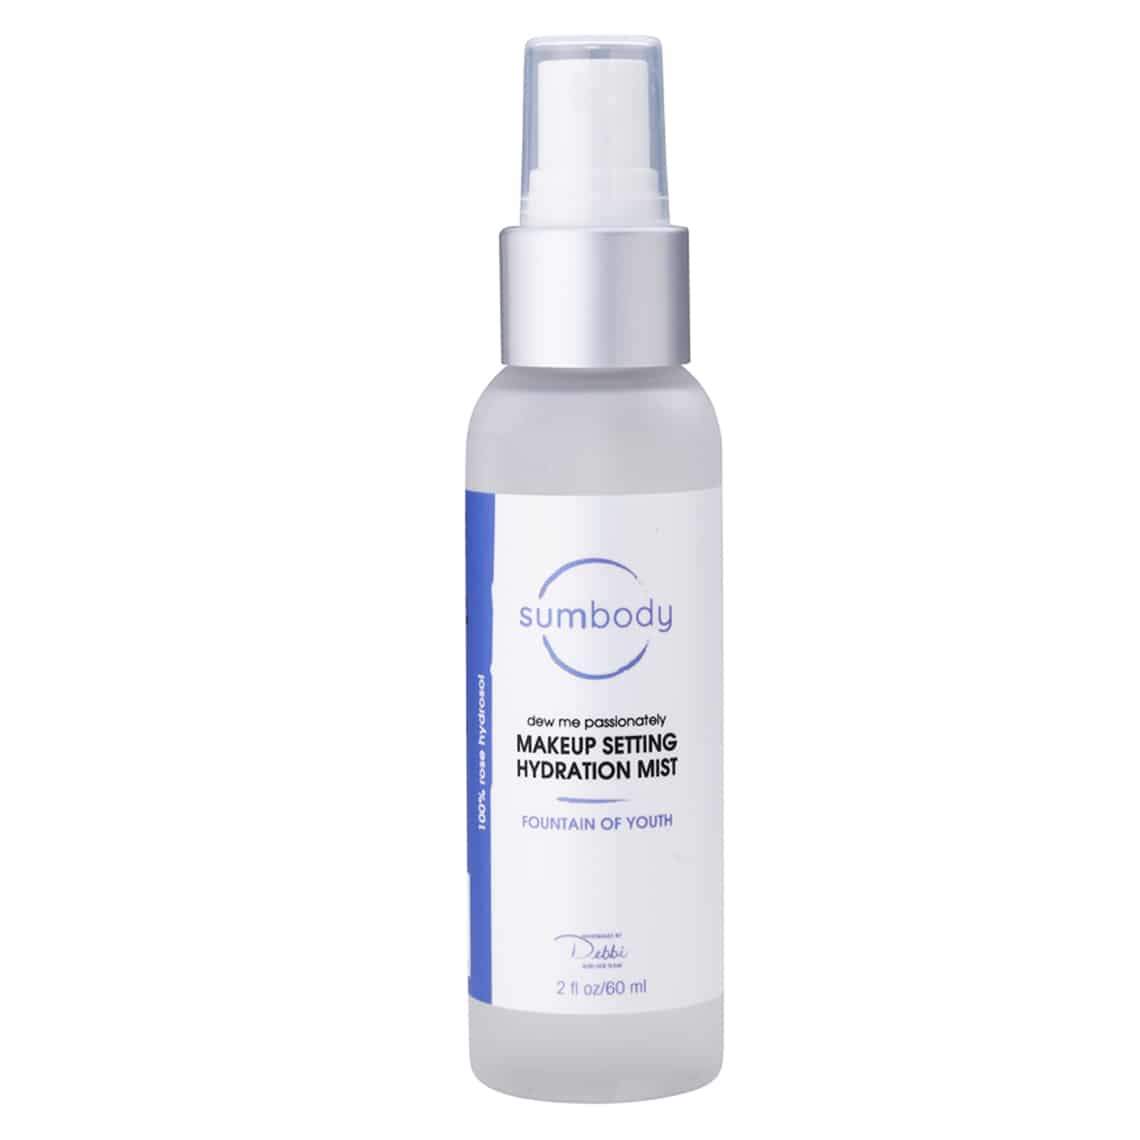 Dew Me Passionately Makeup Setting Hydration Mist by Sumbody Skincare